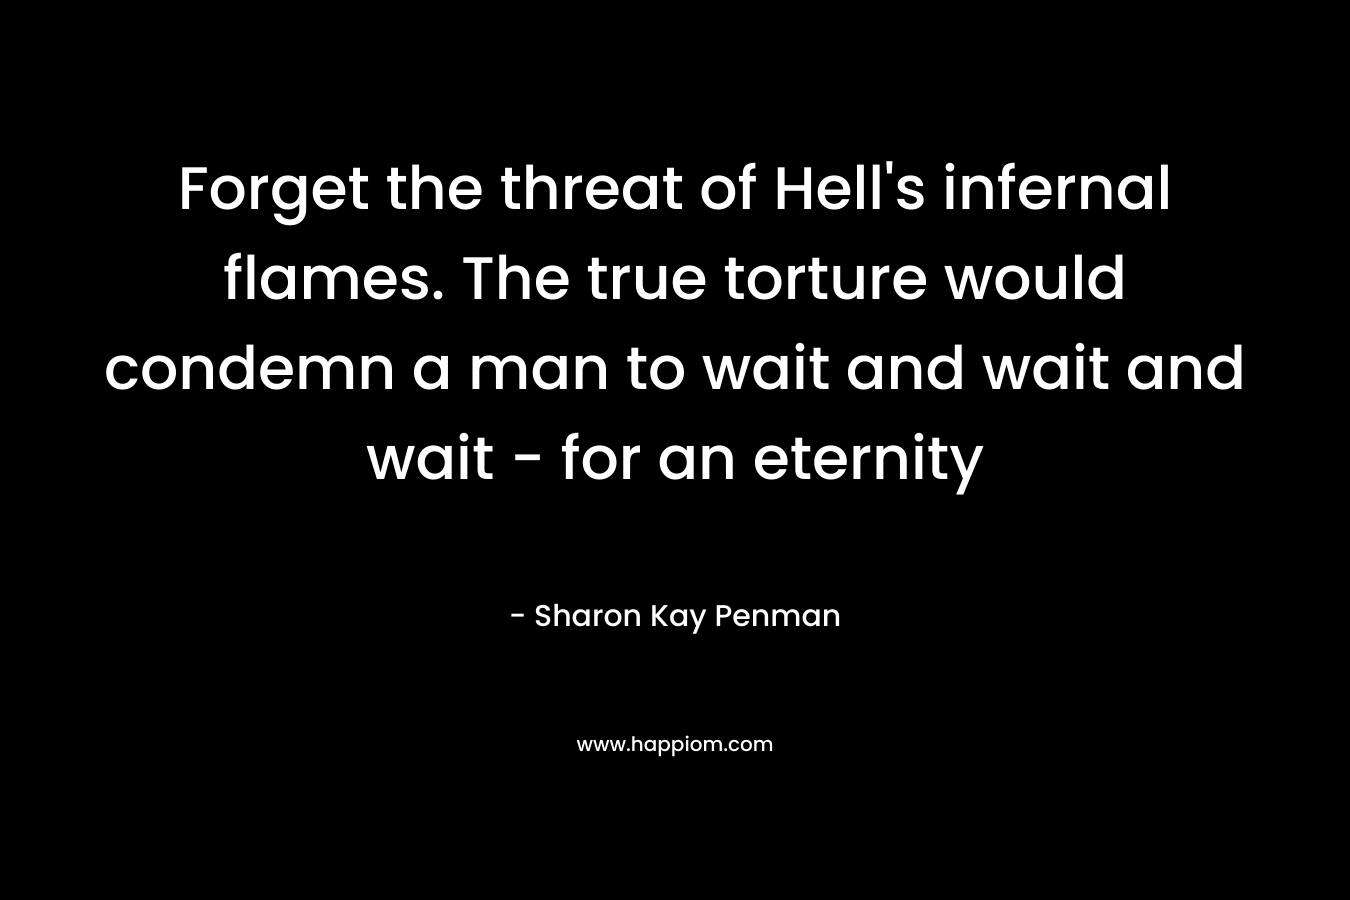 Forget the threat of Hell's infernal flames. The true torture would condemn a man to wait and wait and wait - for an eternity